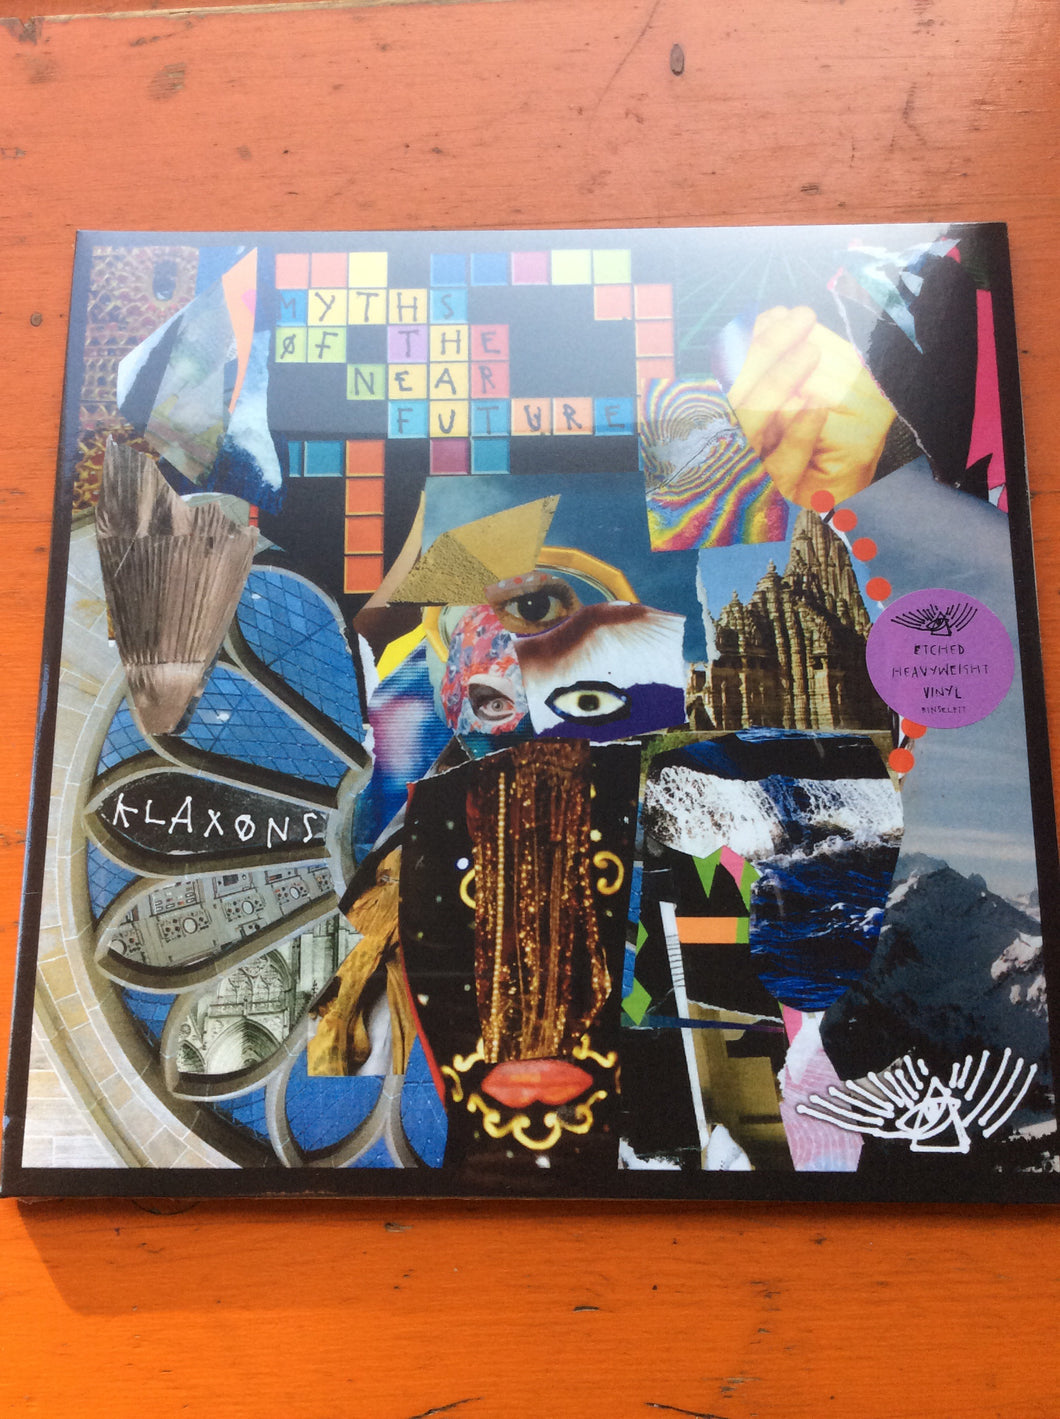 The Klaxons - Myths Of The Near Future